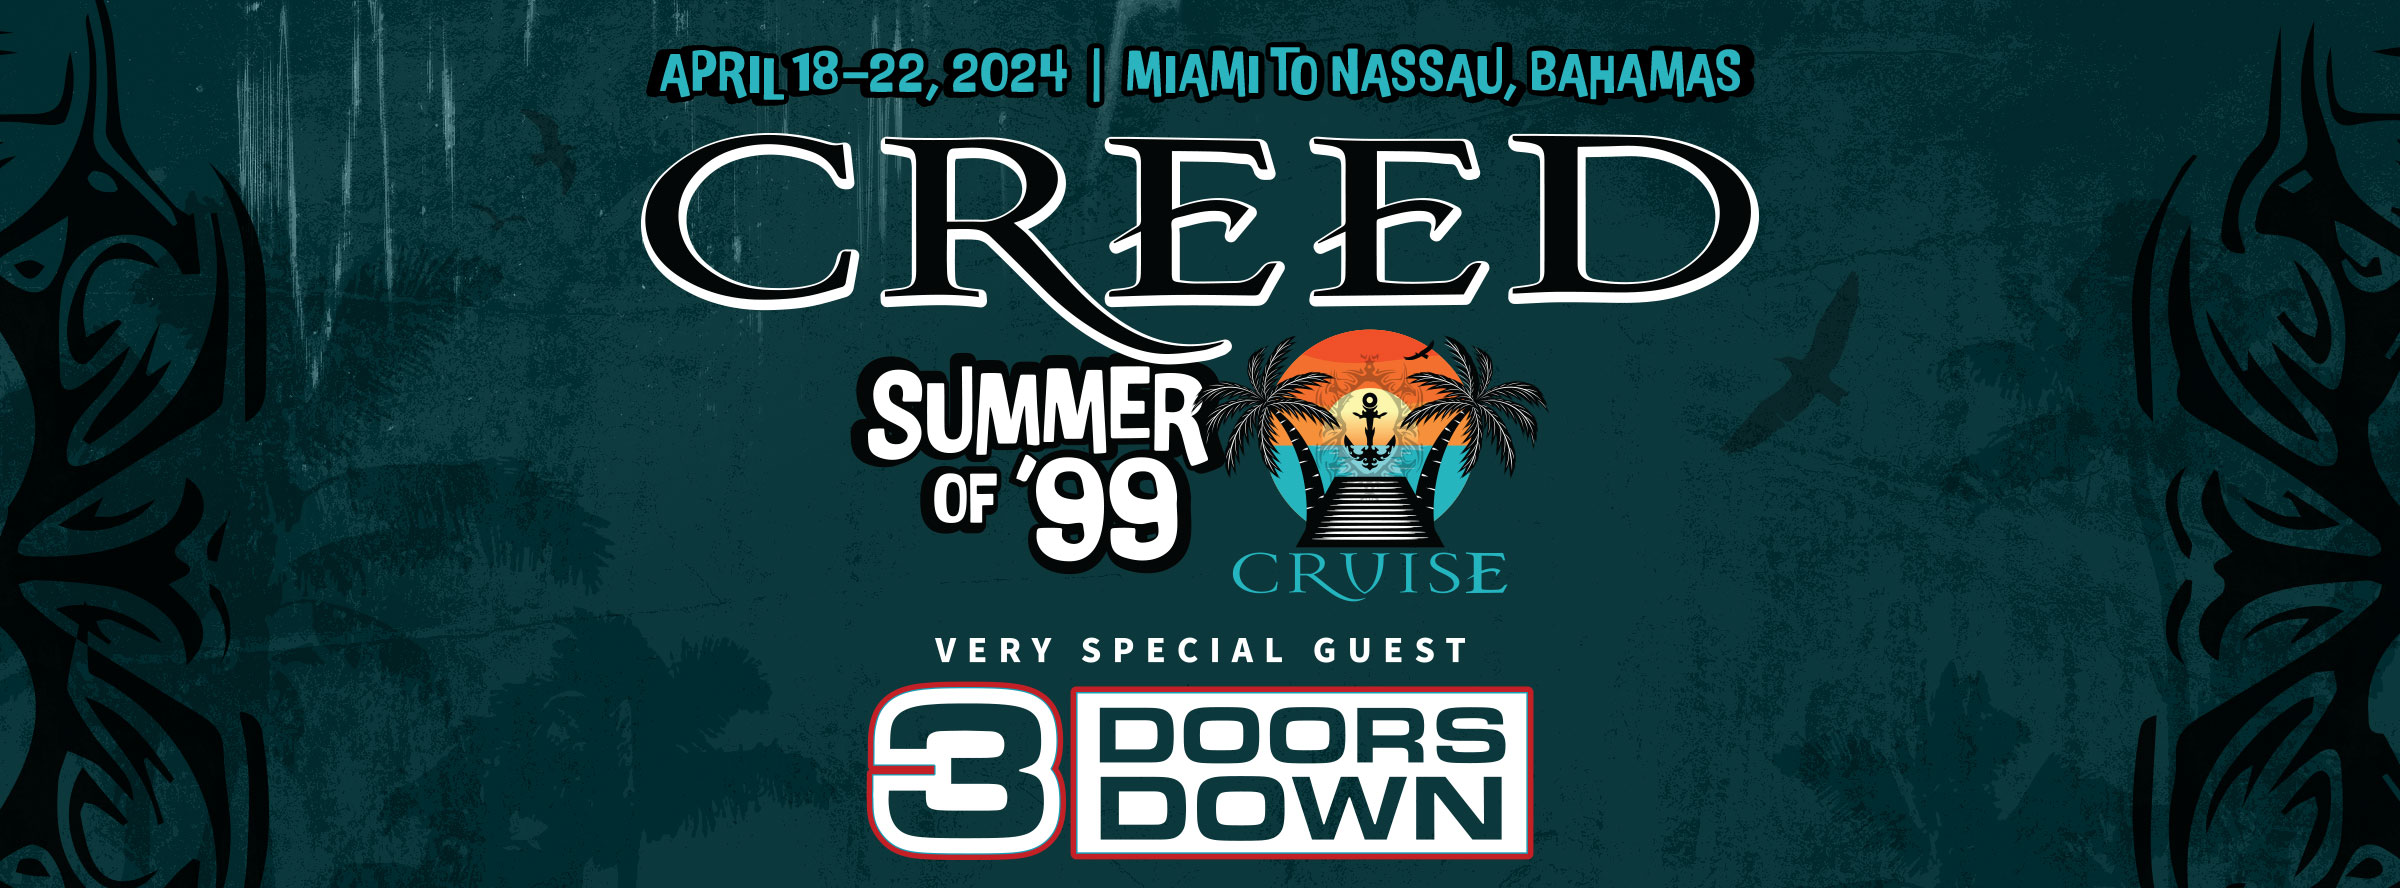 summer of 99 cruise tickets price